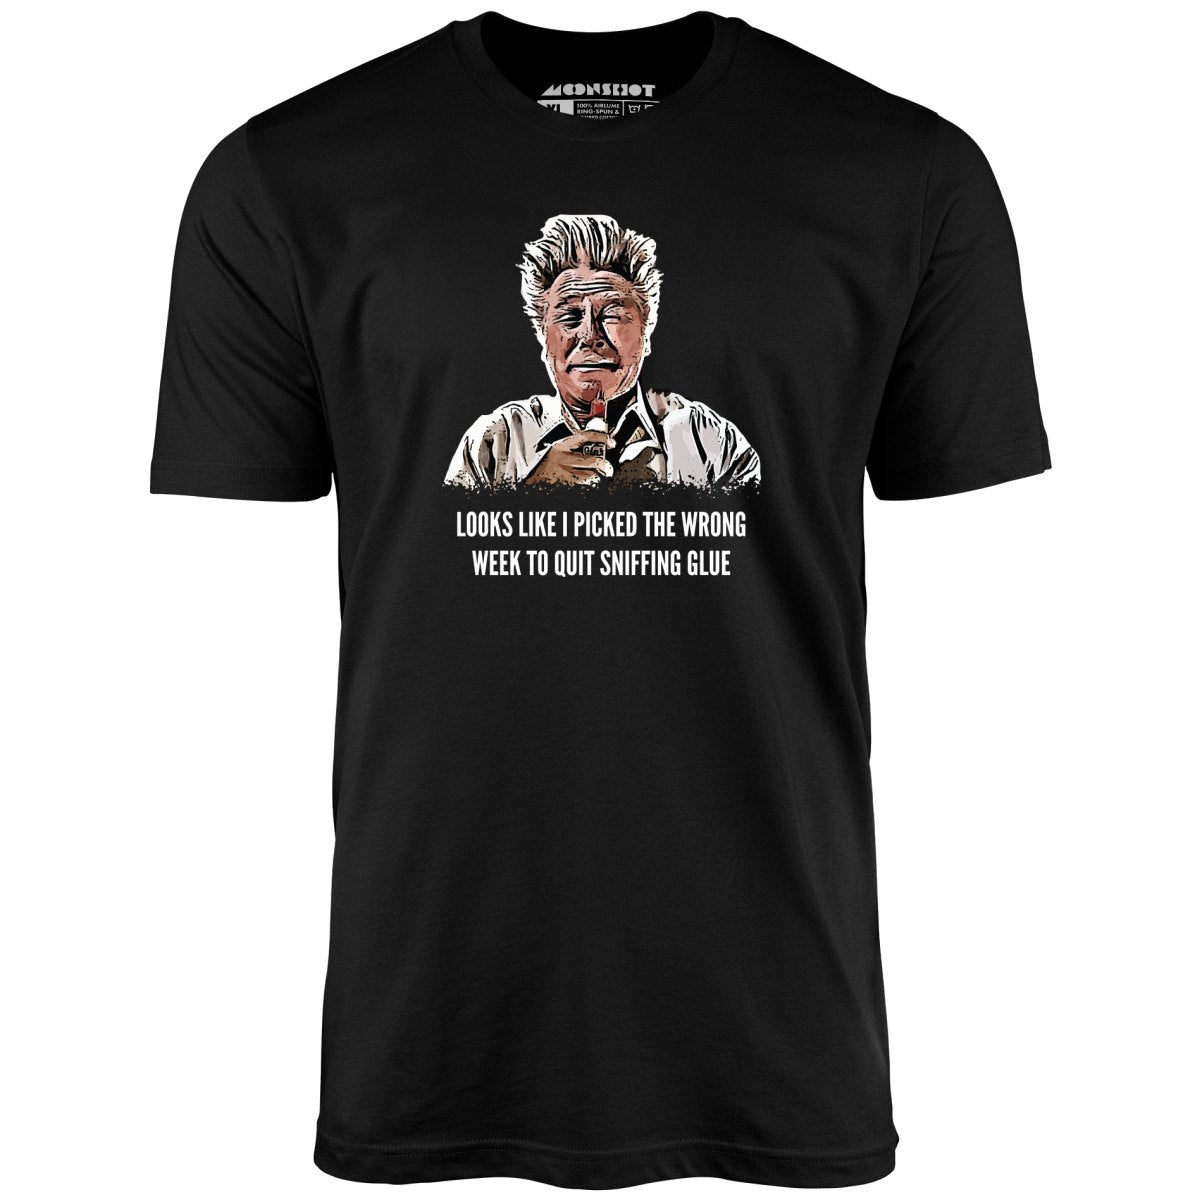 Looks Like I Picked the Wrong Week to Quit Sniffing Glue - Unisex T-Shirt